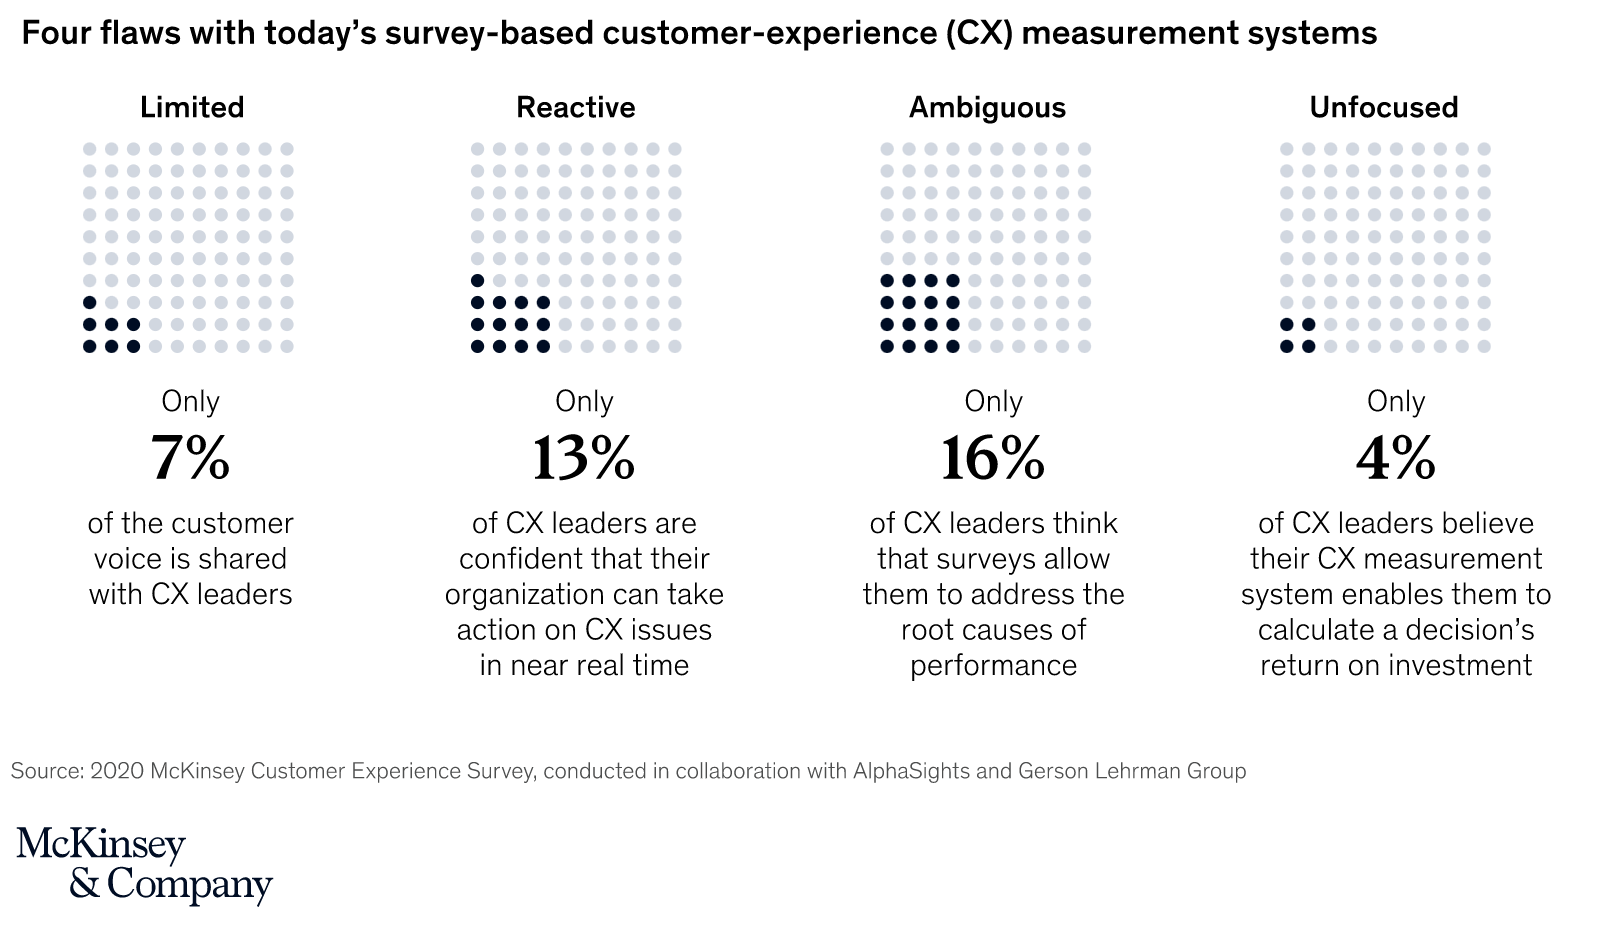 Survey-based measurement systems do not meet the demands of todays companies